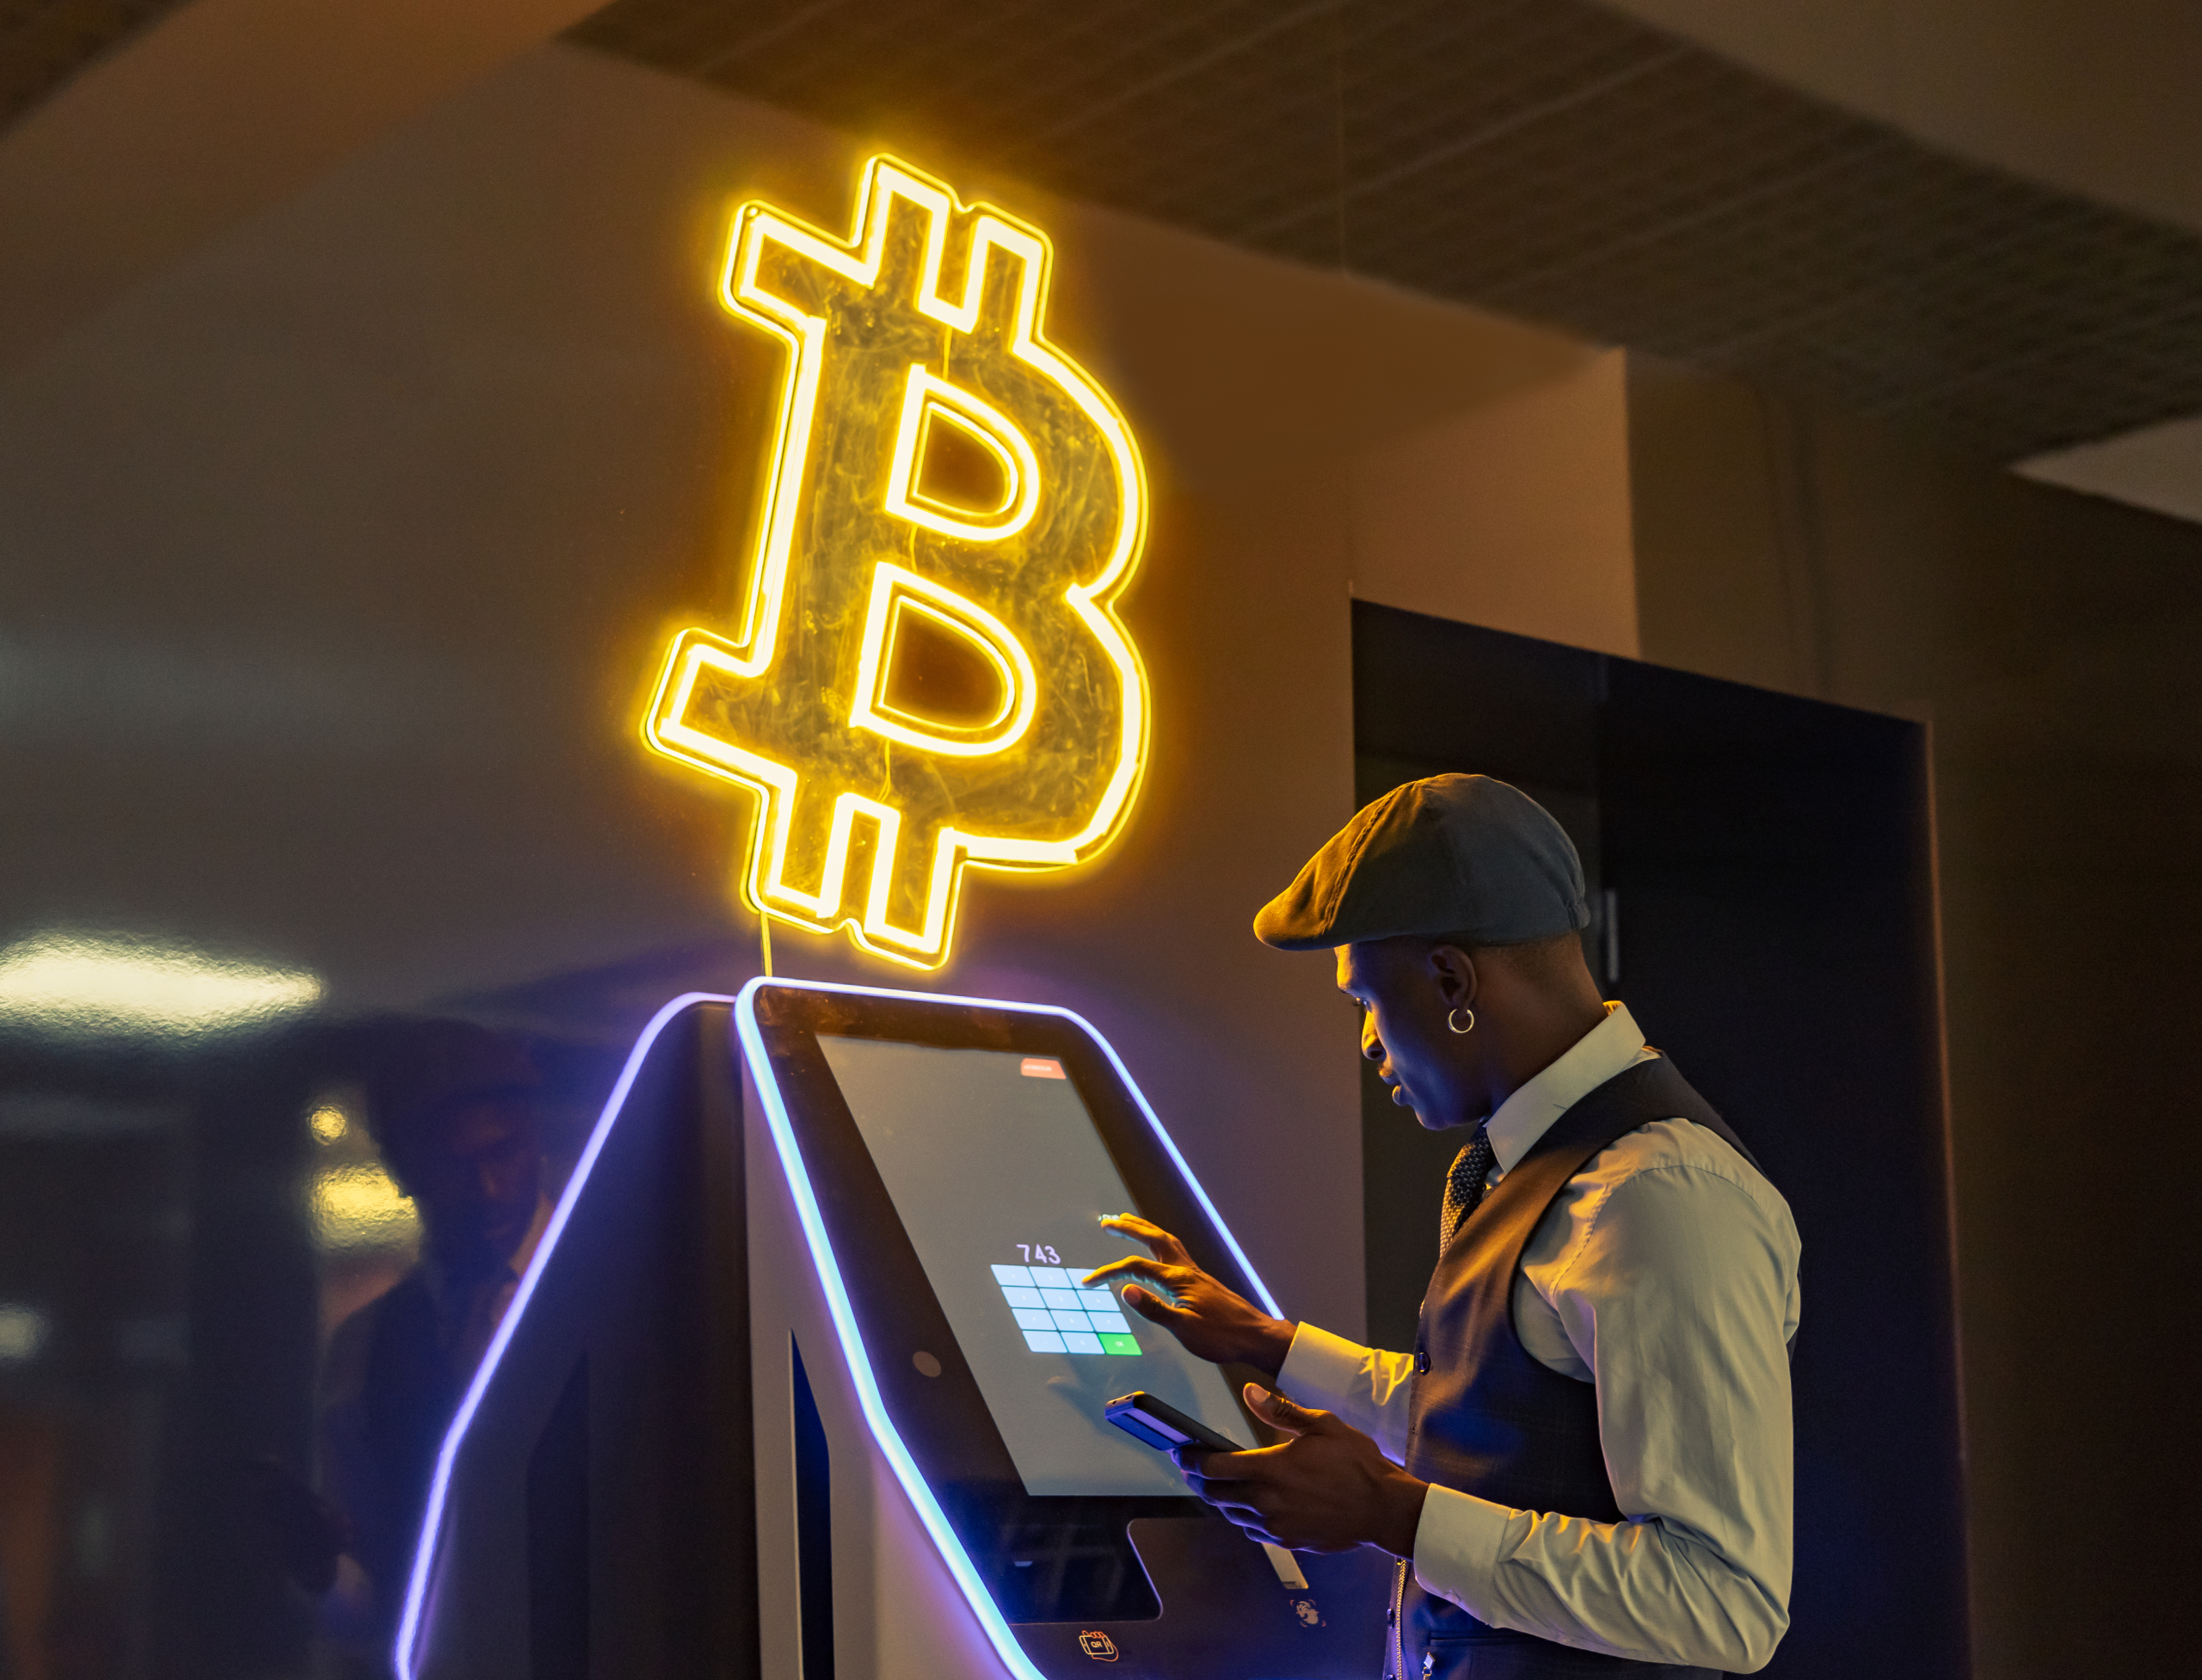 Bitcoin ATM growth is falling for the first time ever
